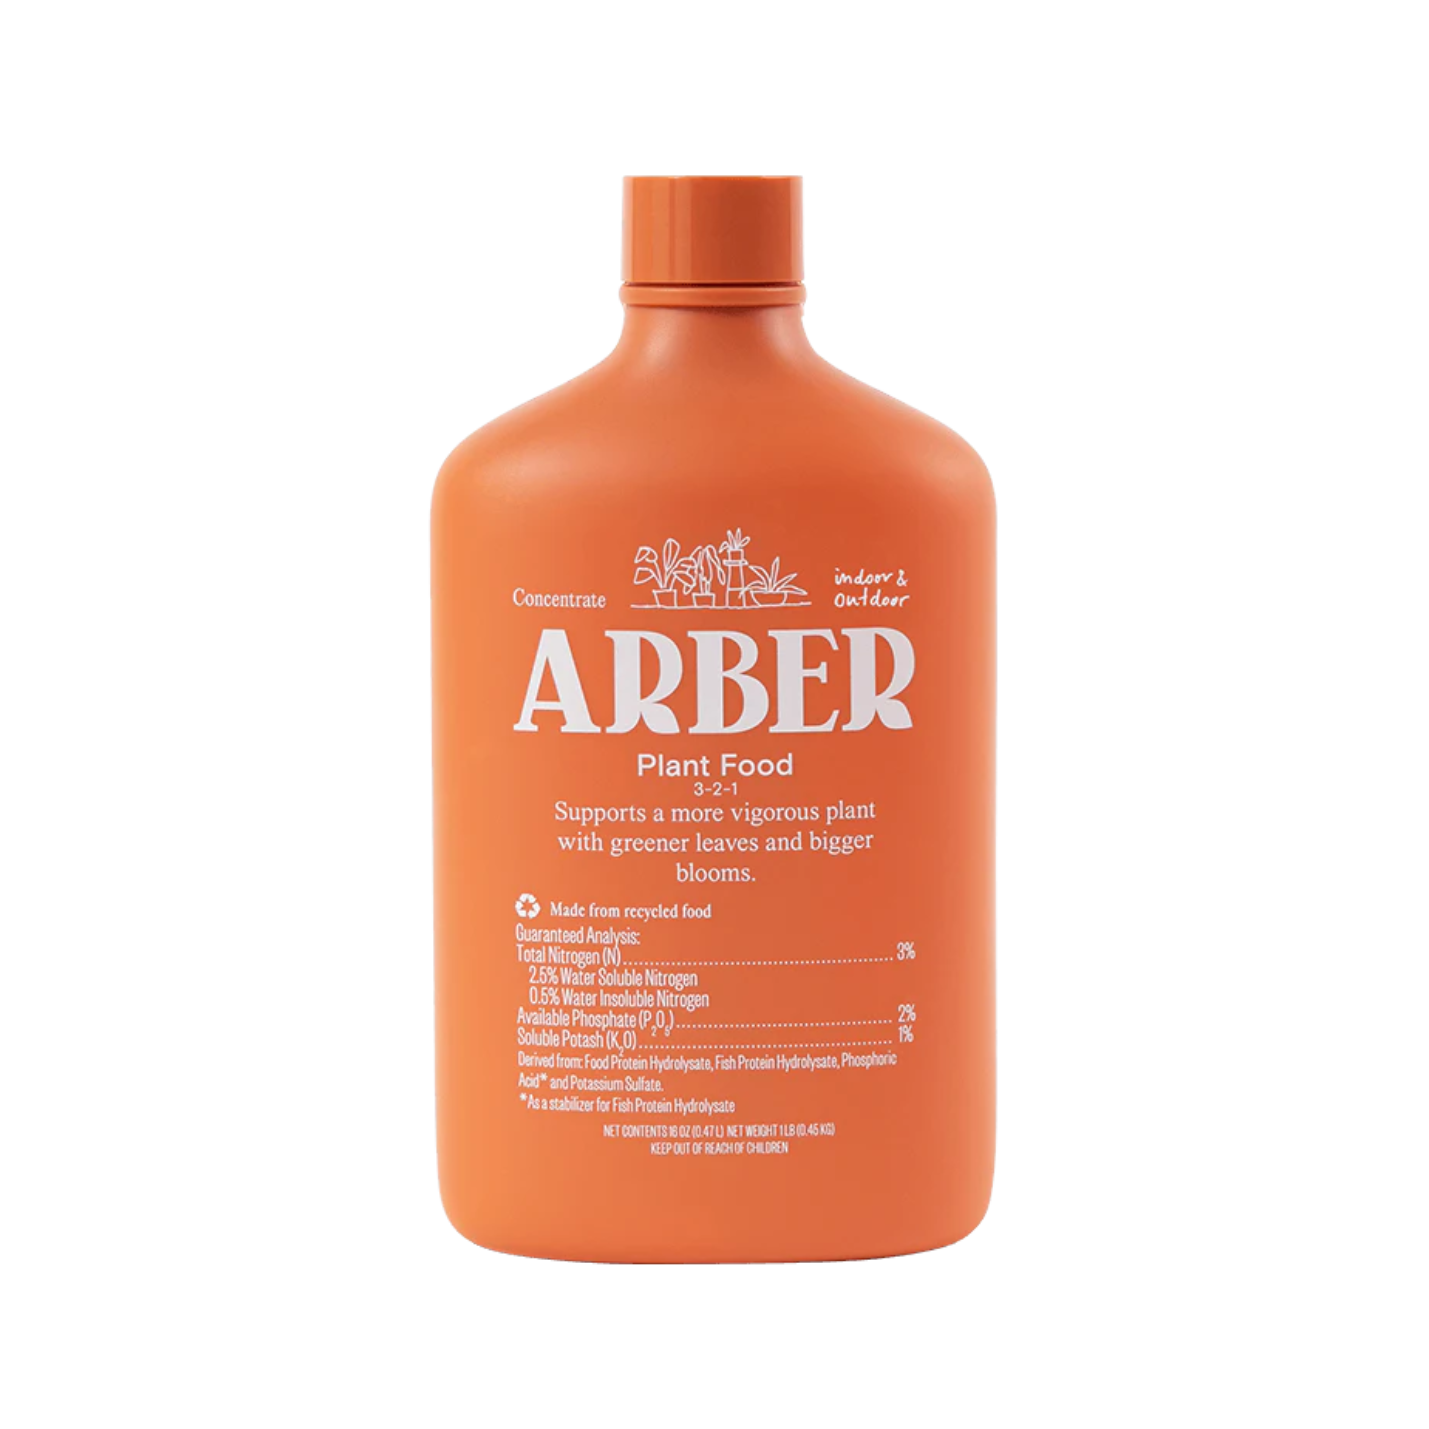 an orange bottle of arber organic plant food against a white background